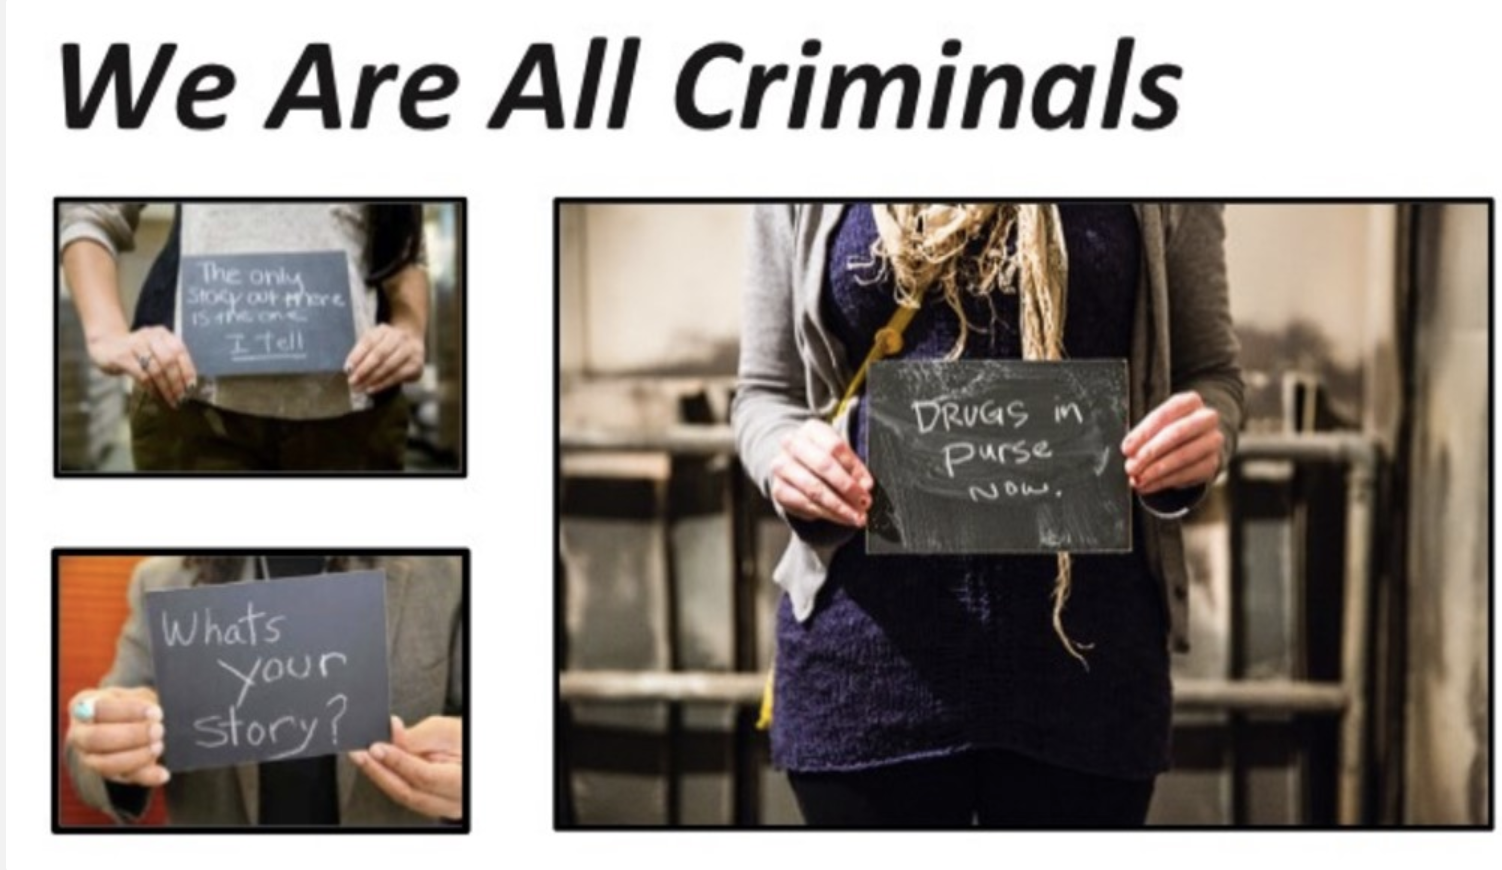 We are all criminals poster